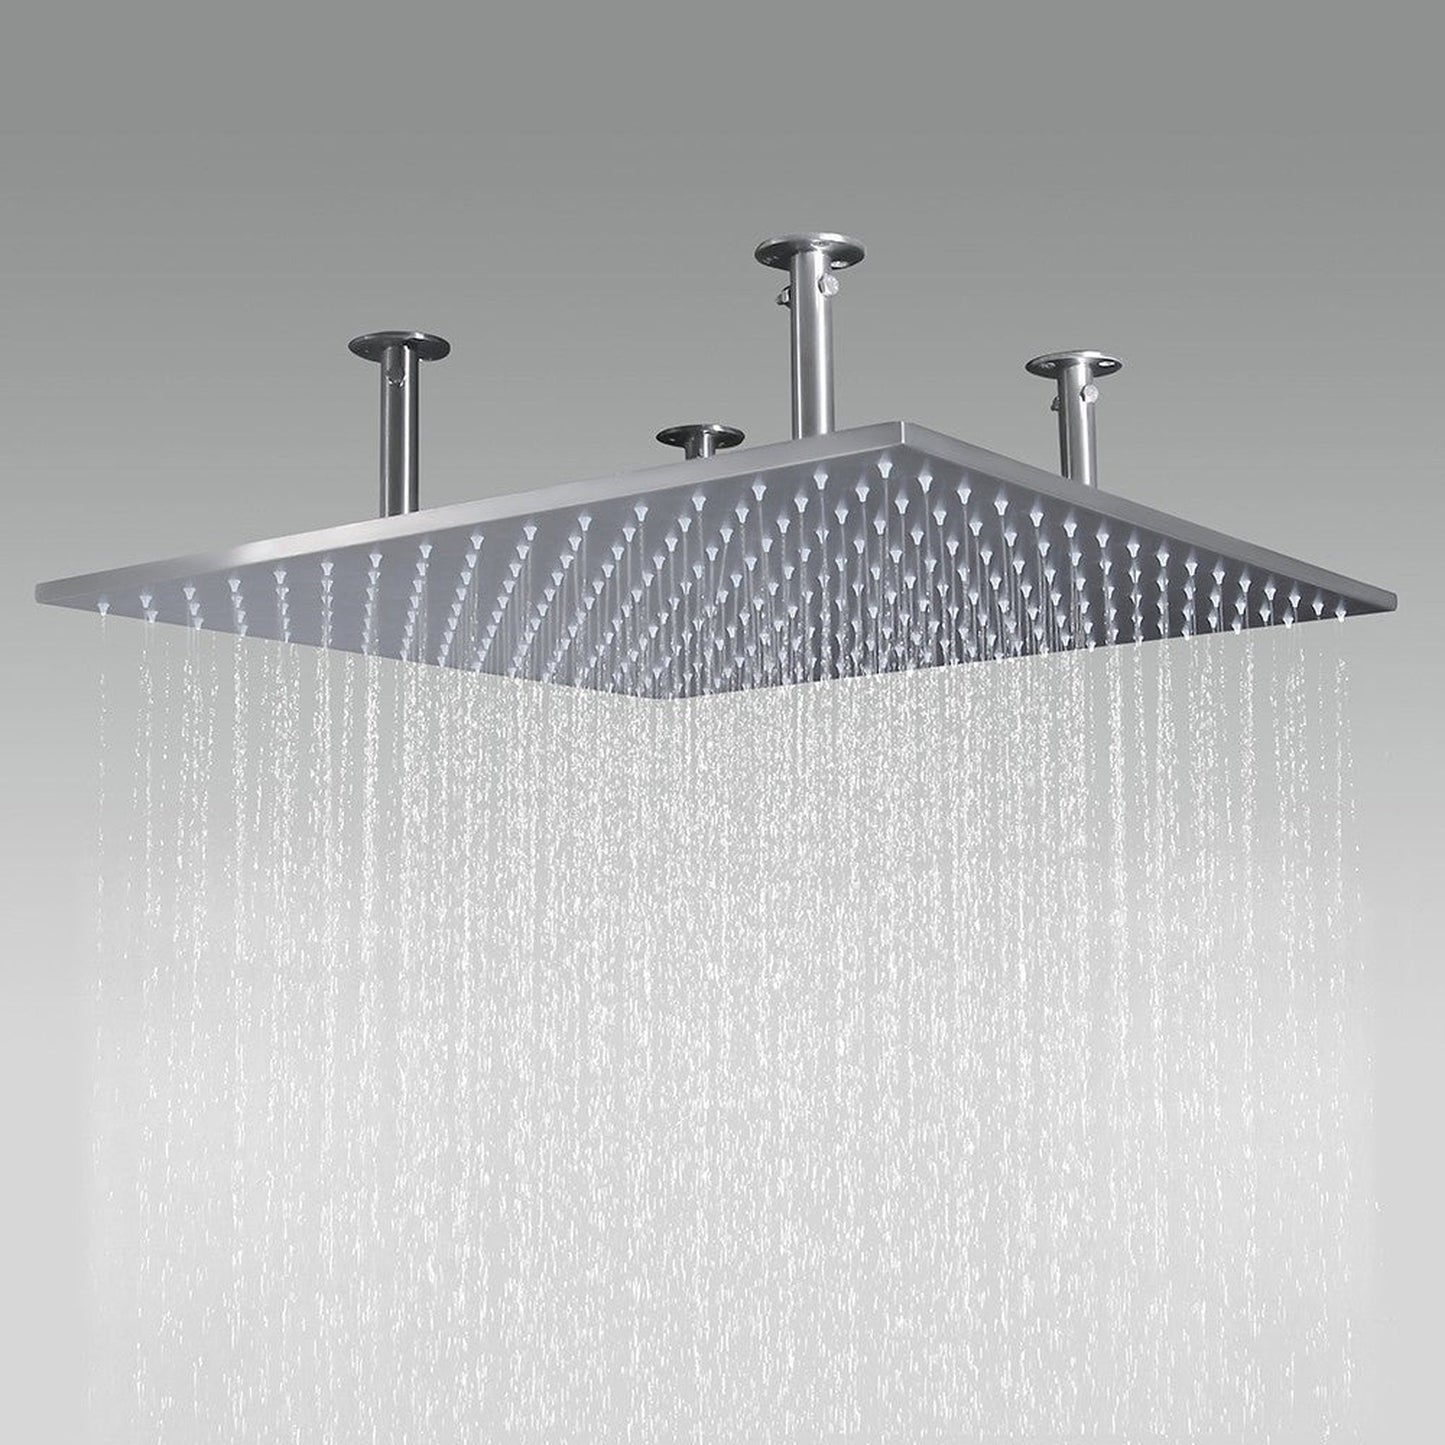 Fontana 20" x 20" Brushed Nickel Ceiling Mounted Thermostatic Valve Shower System With 3-Jet Sprays, Hand Shower and Water Powered LED Lights